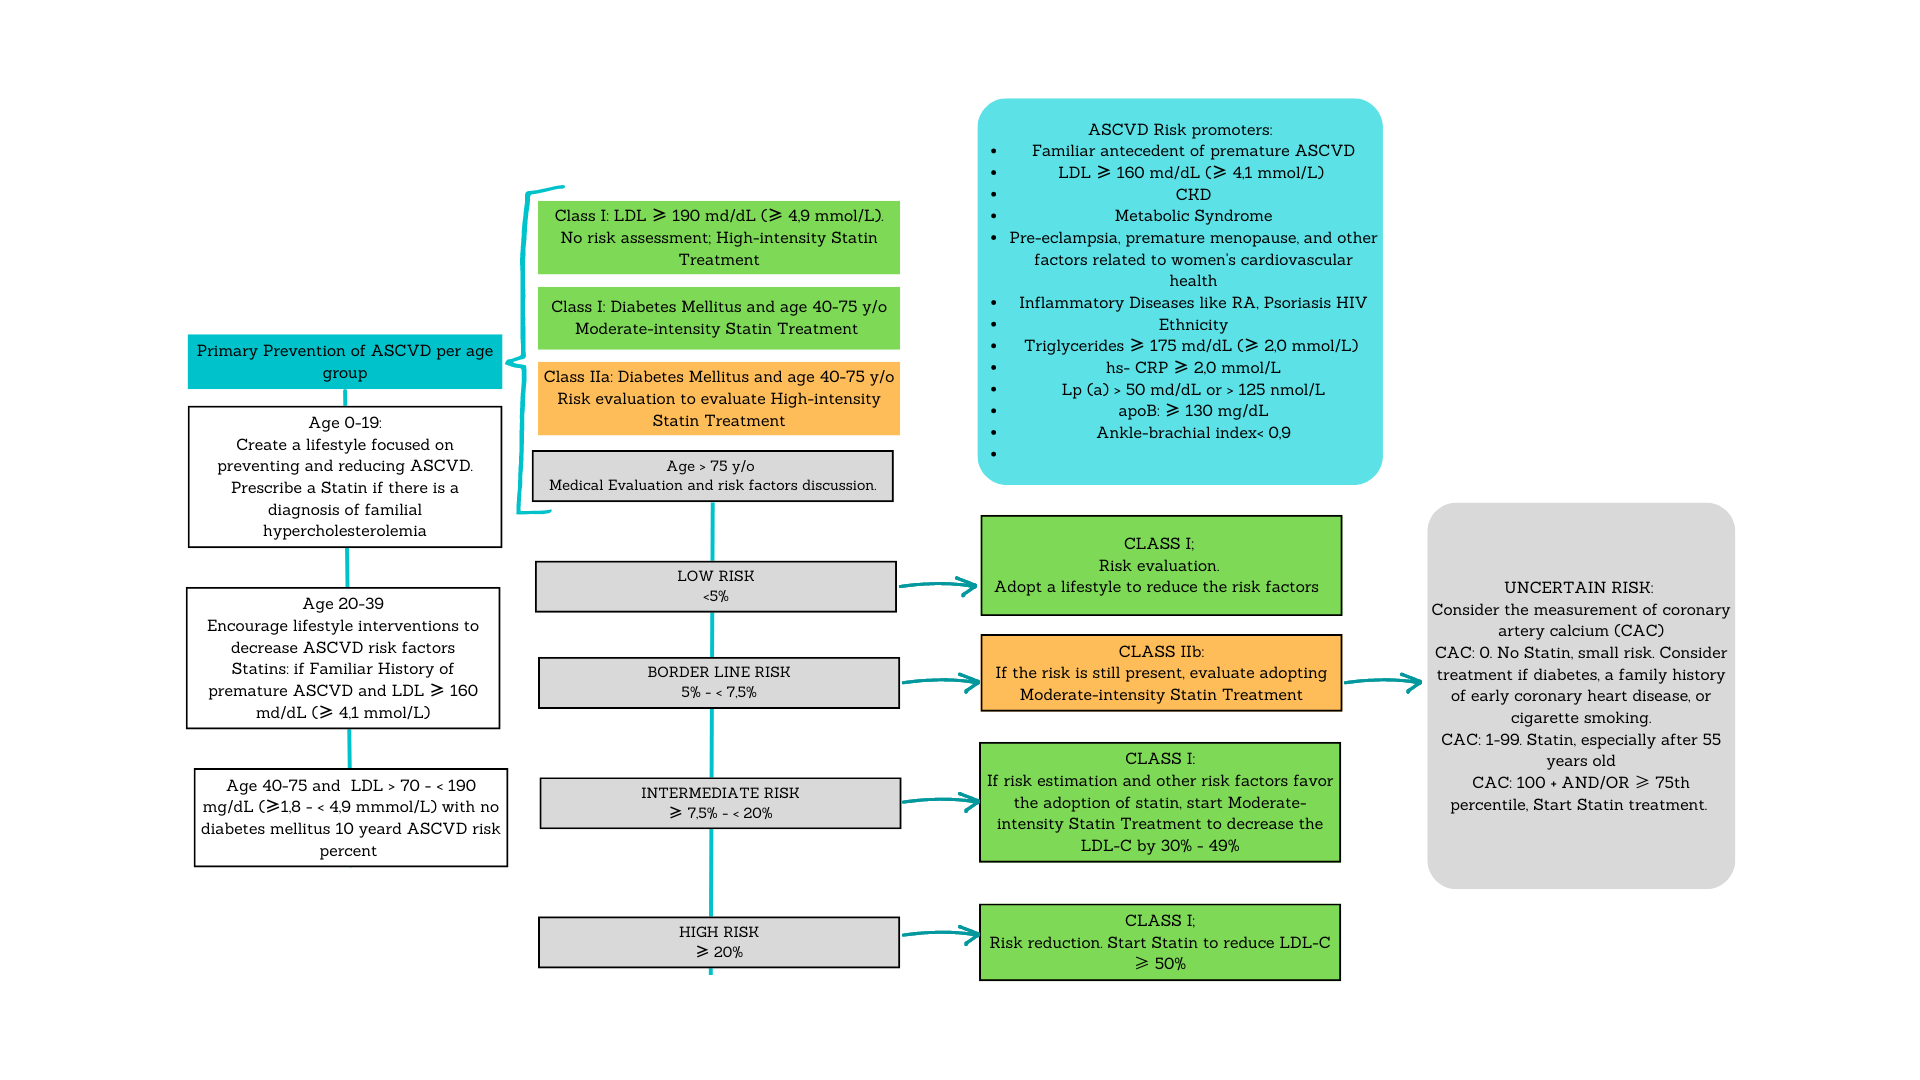 Adapted from 2019 ACC/AHA Guideline on the Primary Prevention of Cardiovascular Disease [18]